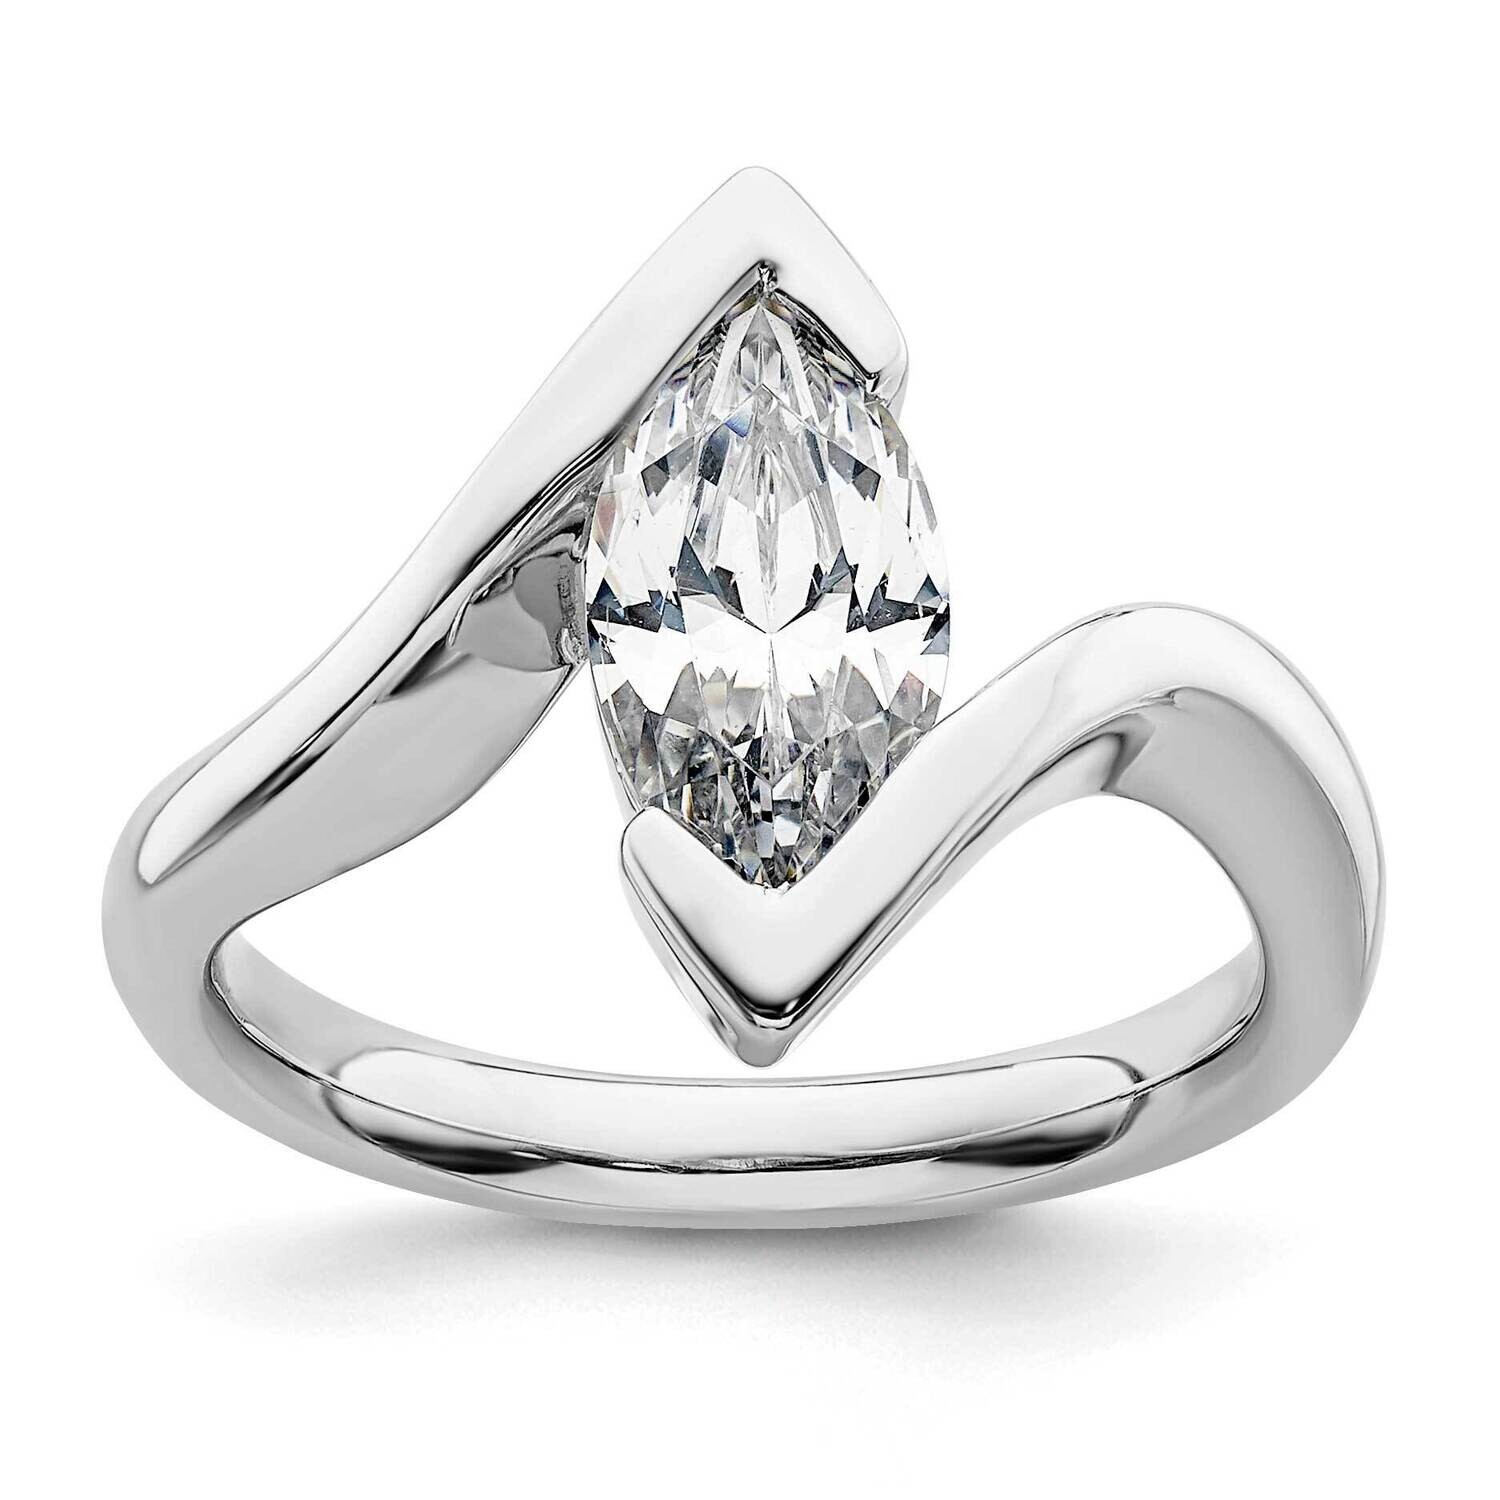 Holds 2 Carat 12.6X6.3mm Marquise Half-Bezel Bypass Solitaire Engagement Ring Mounting 14k White Gold RM1966E-200-CWAA